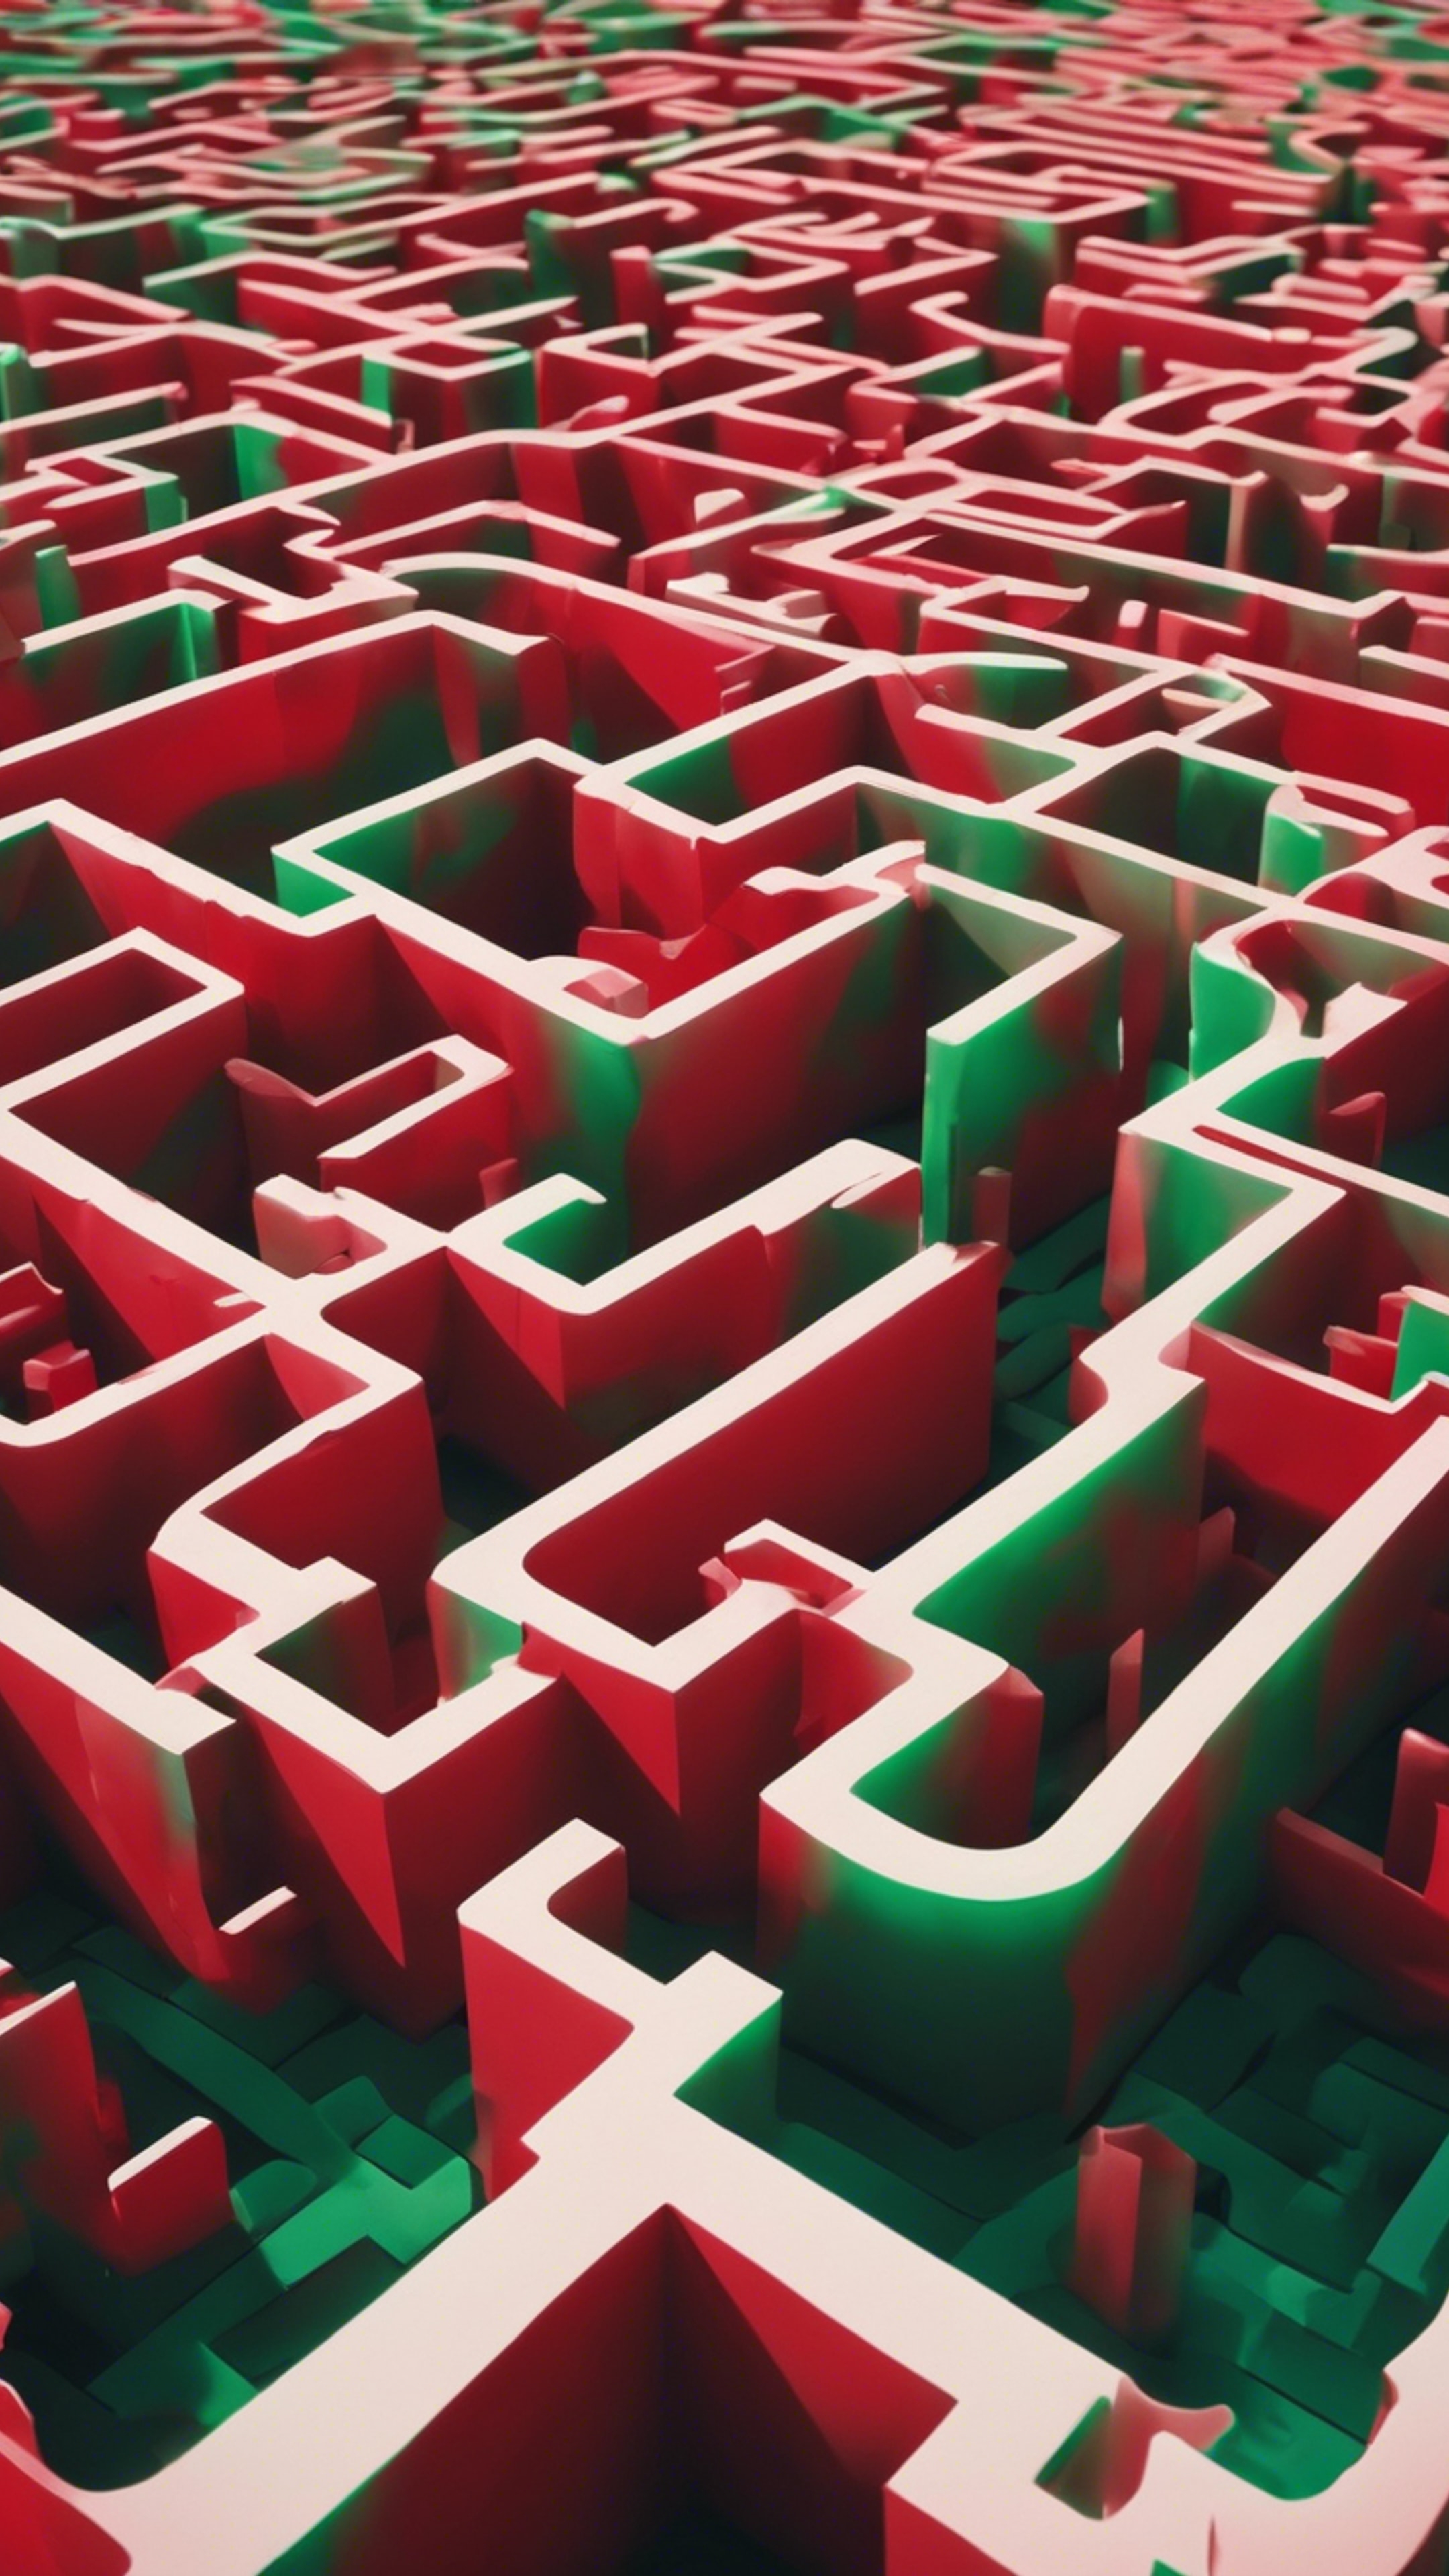 Abstract maze in playful tones of red and green Wallpaper[0fbbfb6eea8048ba8007]